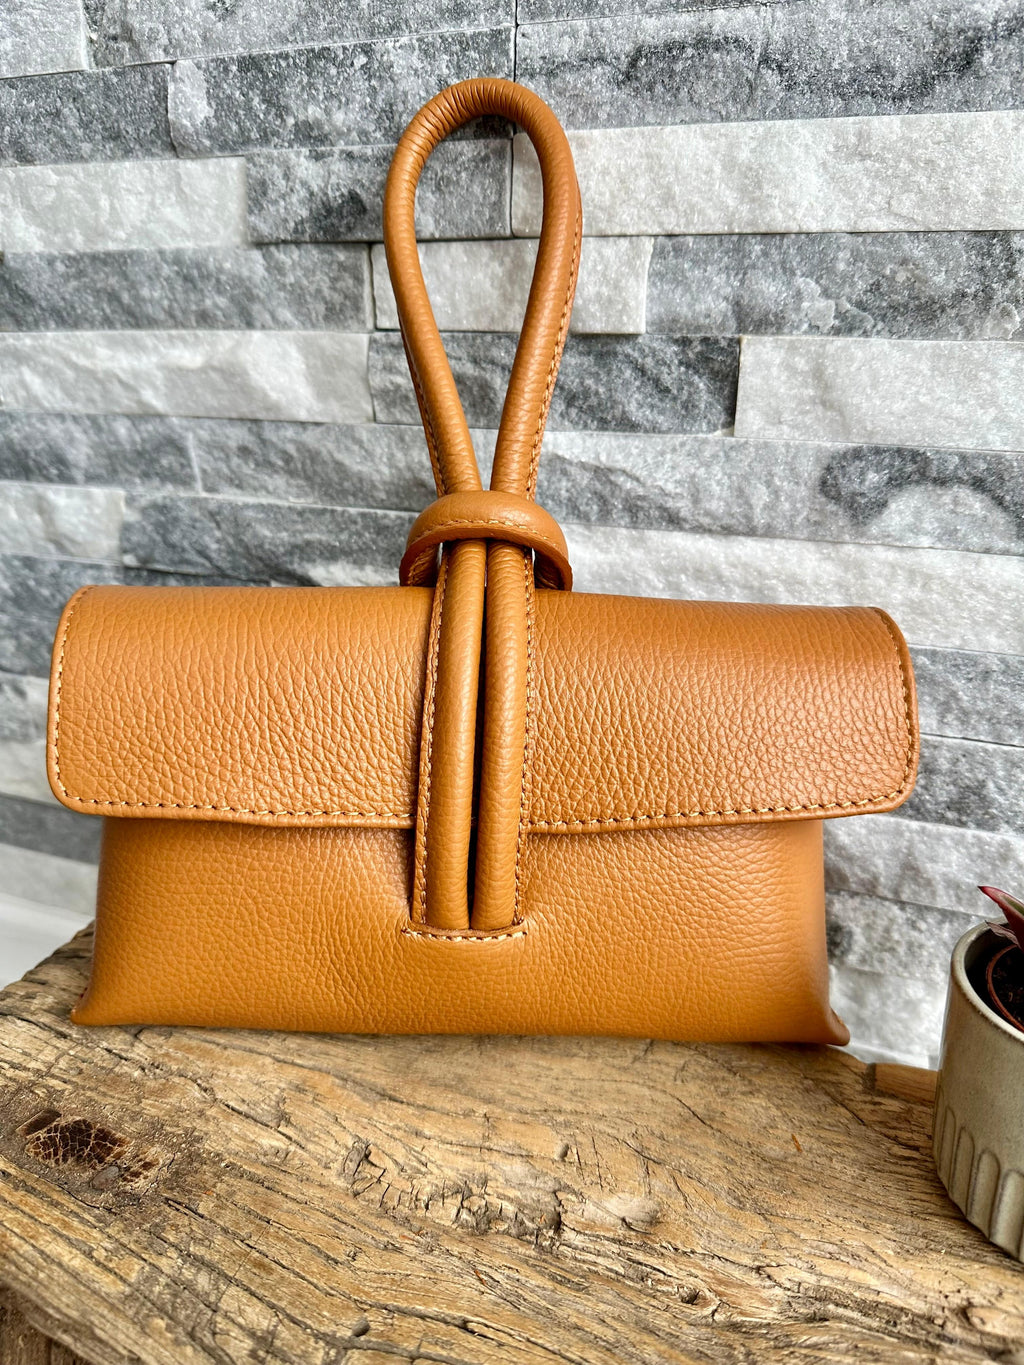 lusciousscarves Tan Italian Leather Clutch Bag , Evening Bag with Loop Handle.